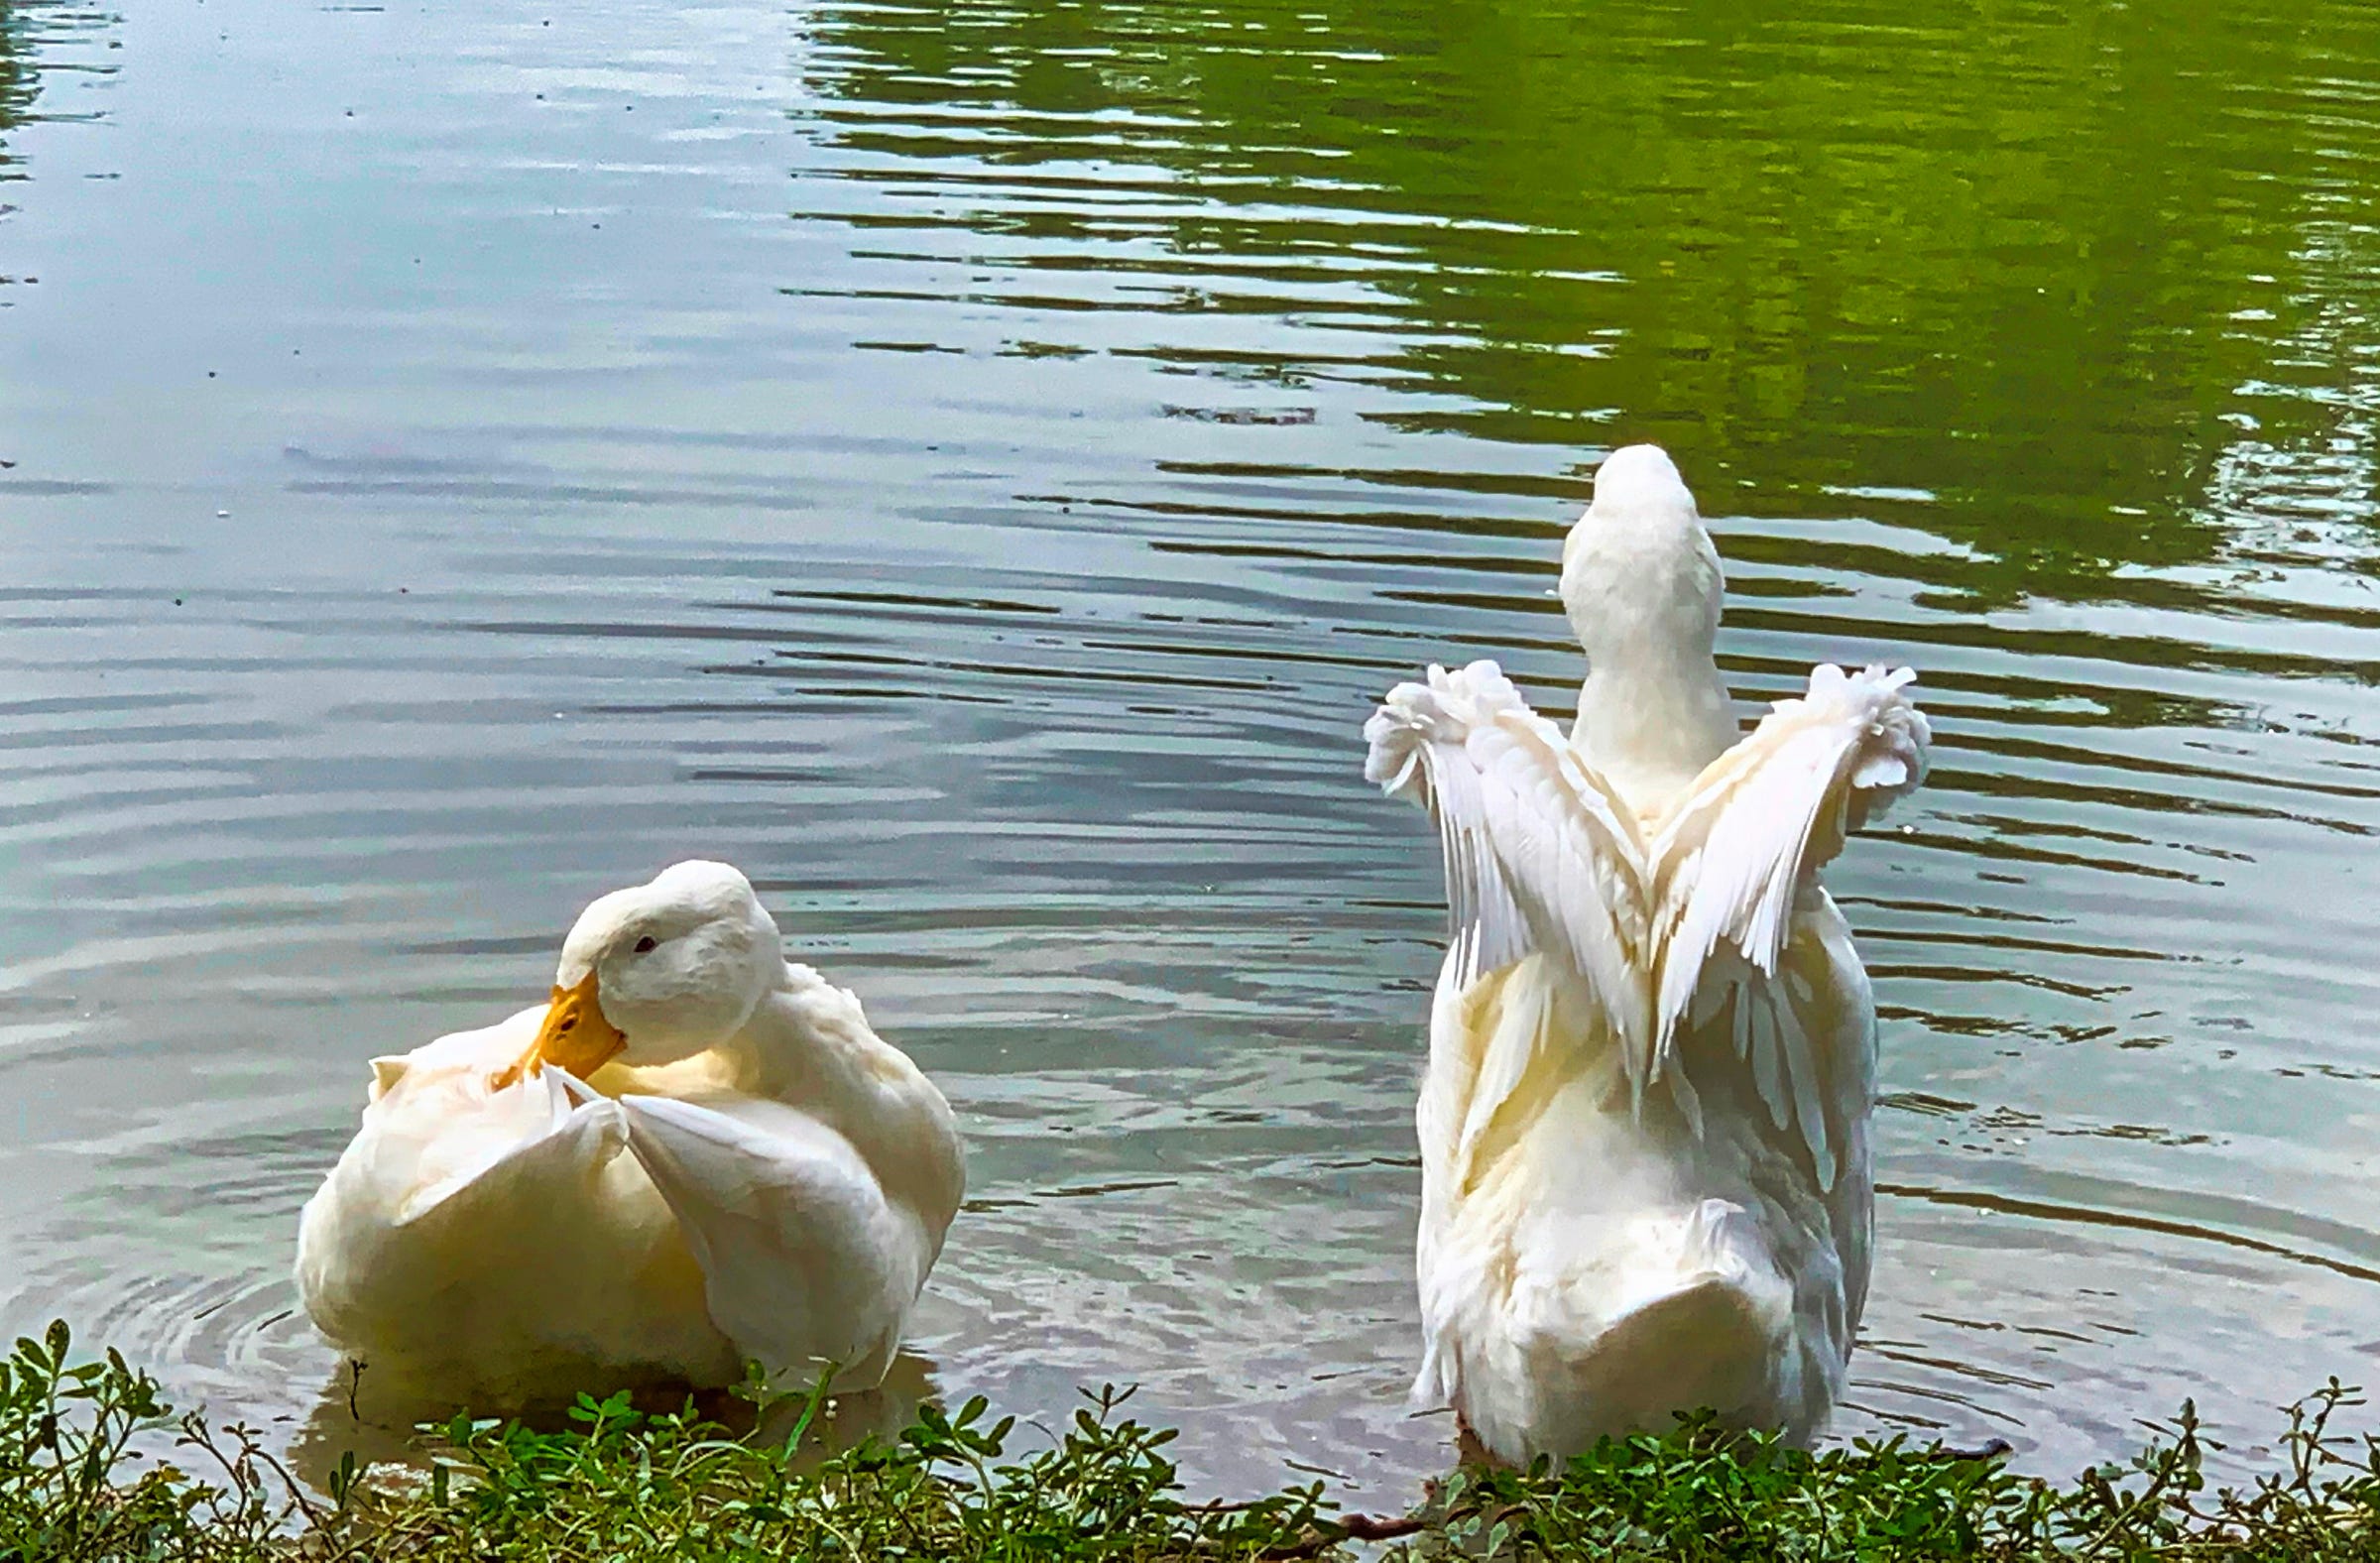 two white ducks in a pond with trees reflected the water; the duck on the left is preening feathers and facing the viewer; the duck on the right has his feathers lifted and faces the pond